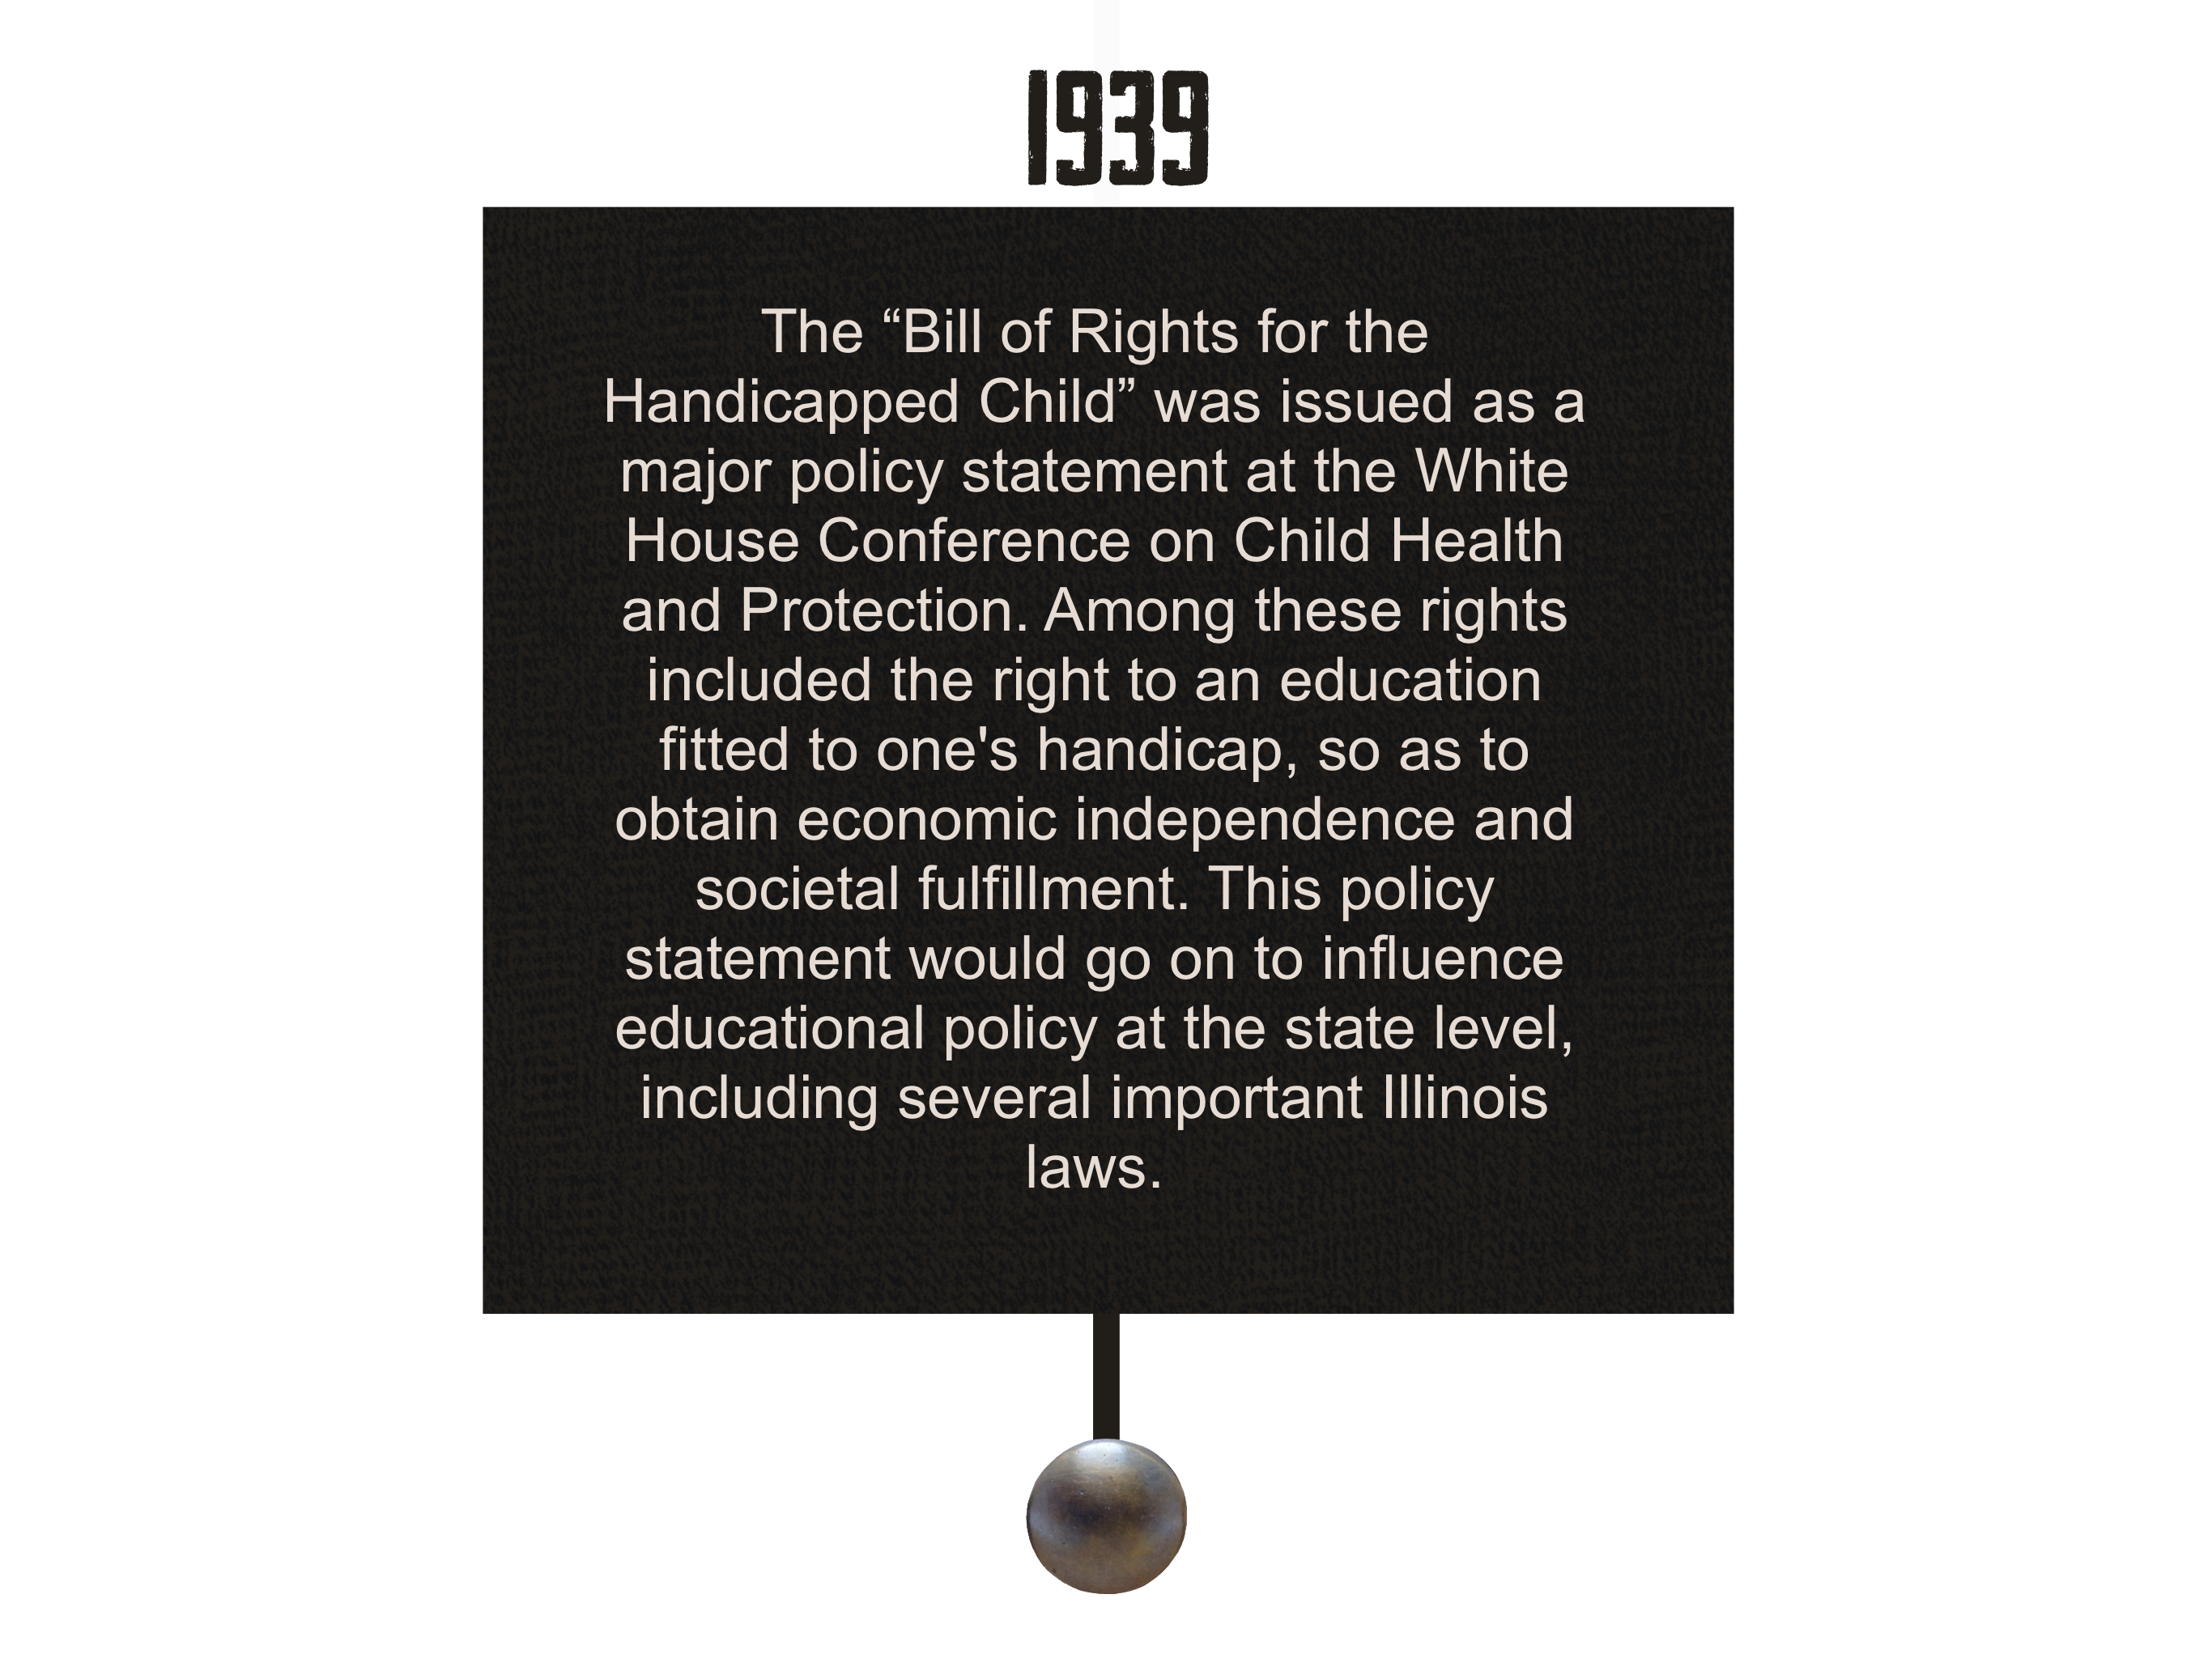 1939
        The “Bill of Rights for the Handicapped Child” was issued as a major policy statement at the White House Conference on Child Health and Protection. Among these rights included the right to an education fitted to one's handicap, so as to obtain economic independence and societal fulfillment. This policy statement would go on to influence educational policy at the state level, including several important Illinois laws. 
        